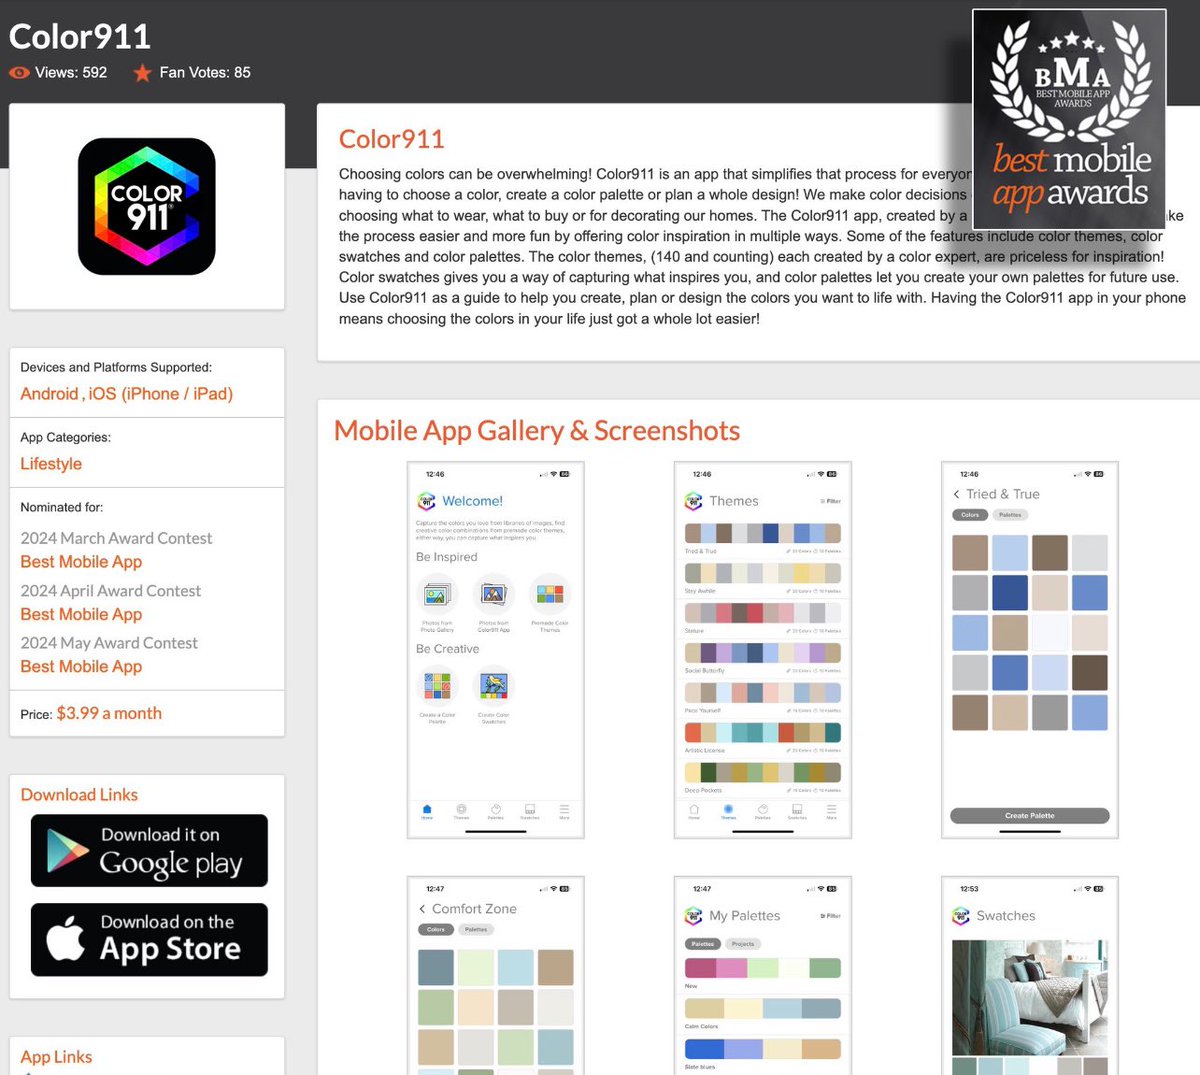 Excited that the #Color911 #app has been nominated for the Best Mobile App Awards! Take a look & find out more about it: Color911.com #bestapp #color #design #inspiration #interiordesign #homedesign #colorinspiration #diy #diydecor @goodhousemag 
@BestAppAwards @HB